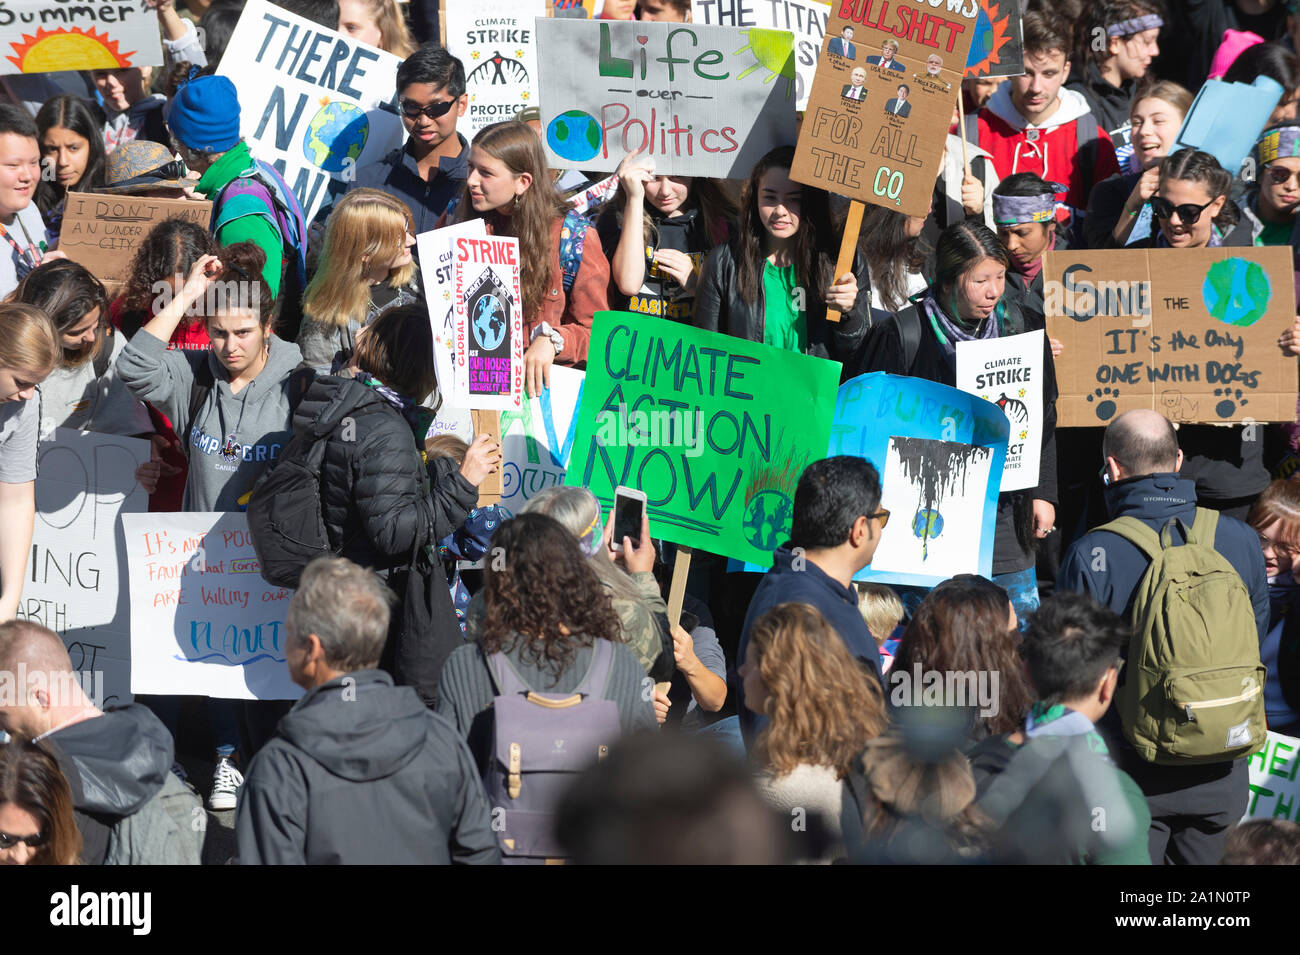 Vancouver, Canada. 27, September 2019. Placards being held by protesters. Climate Strike March. Vancouver, British Columbia, Canada. Gerry Rousseau/Alamy Live News Stock Photo